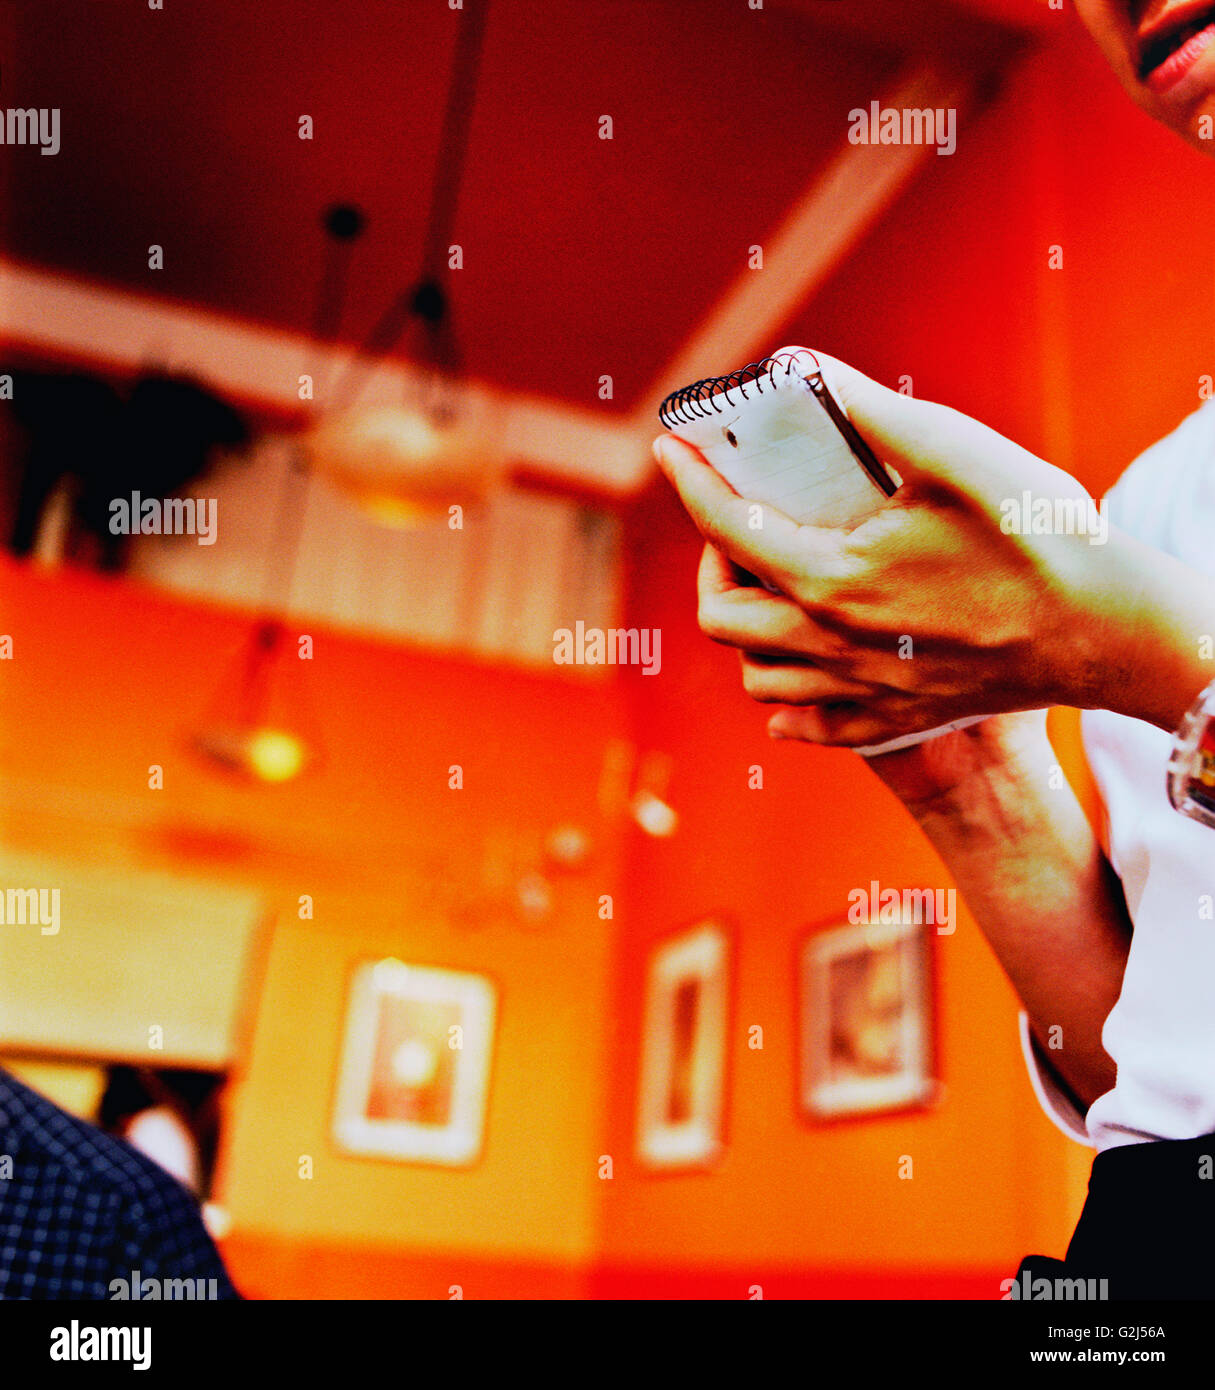 Waiter with Pad Taking Order Stock Photo